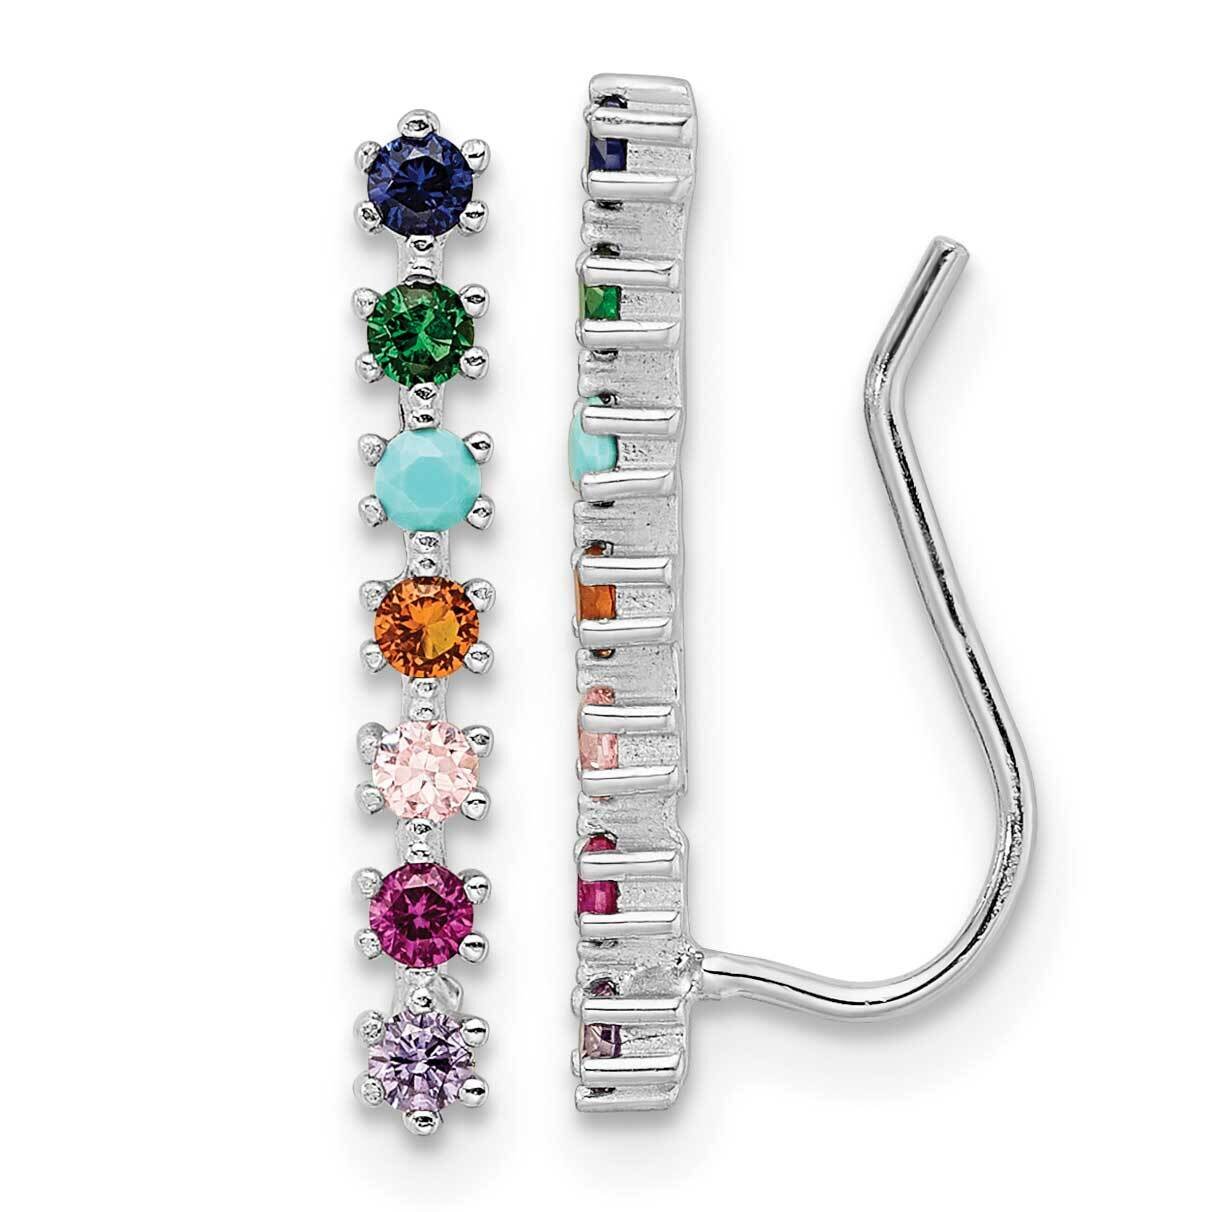 Multi-Color CZ Diamond Earrings Sterling Silver Rhodium-Plated Polished QE16109